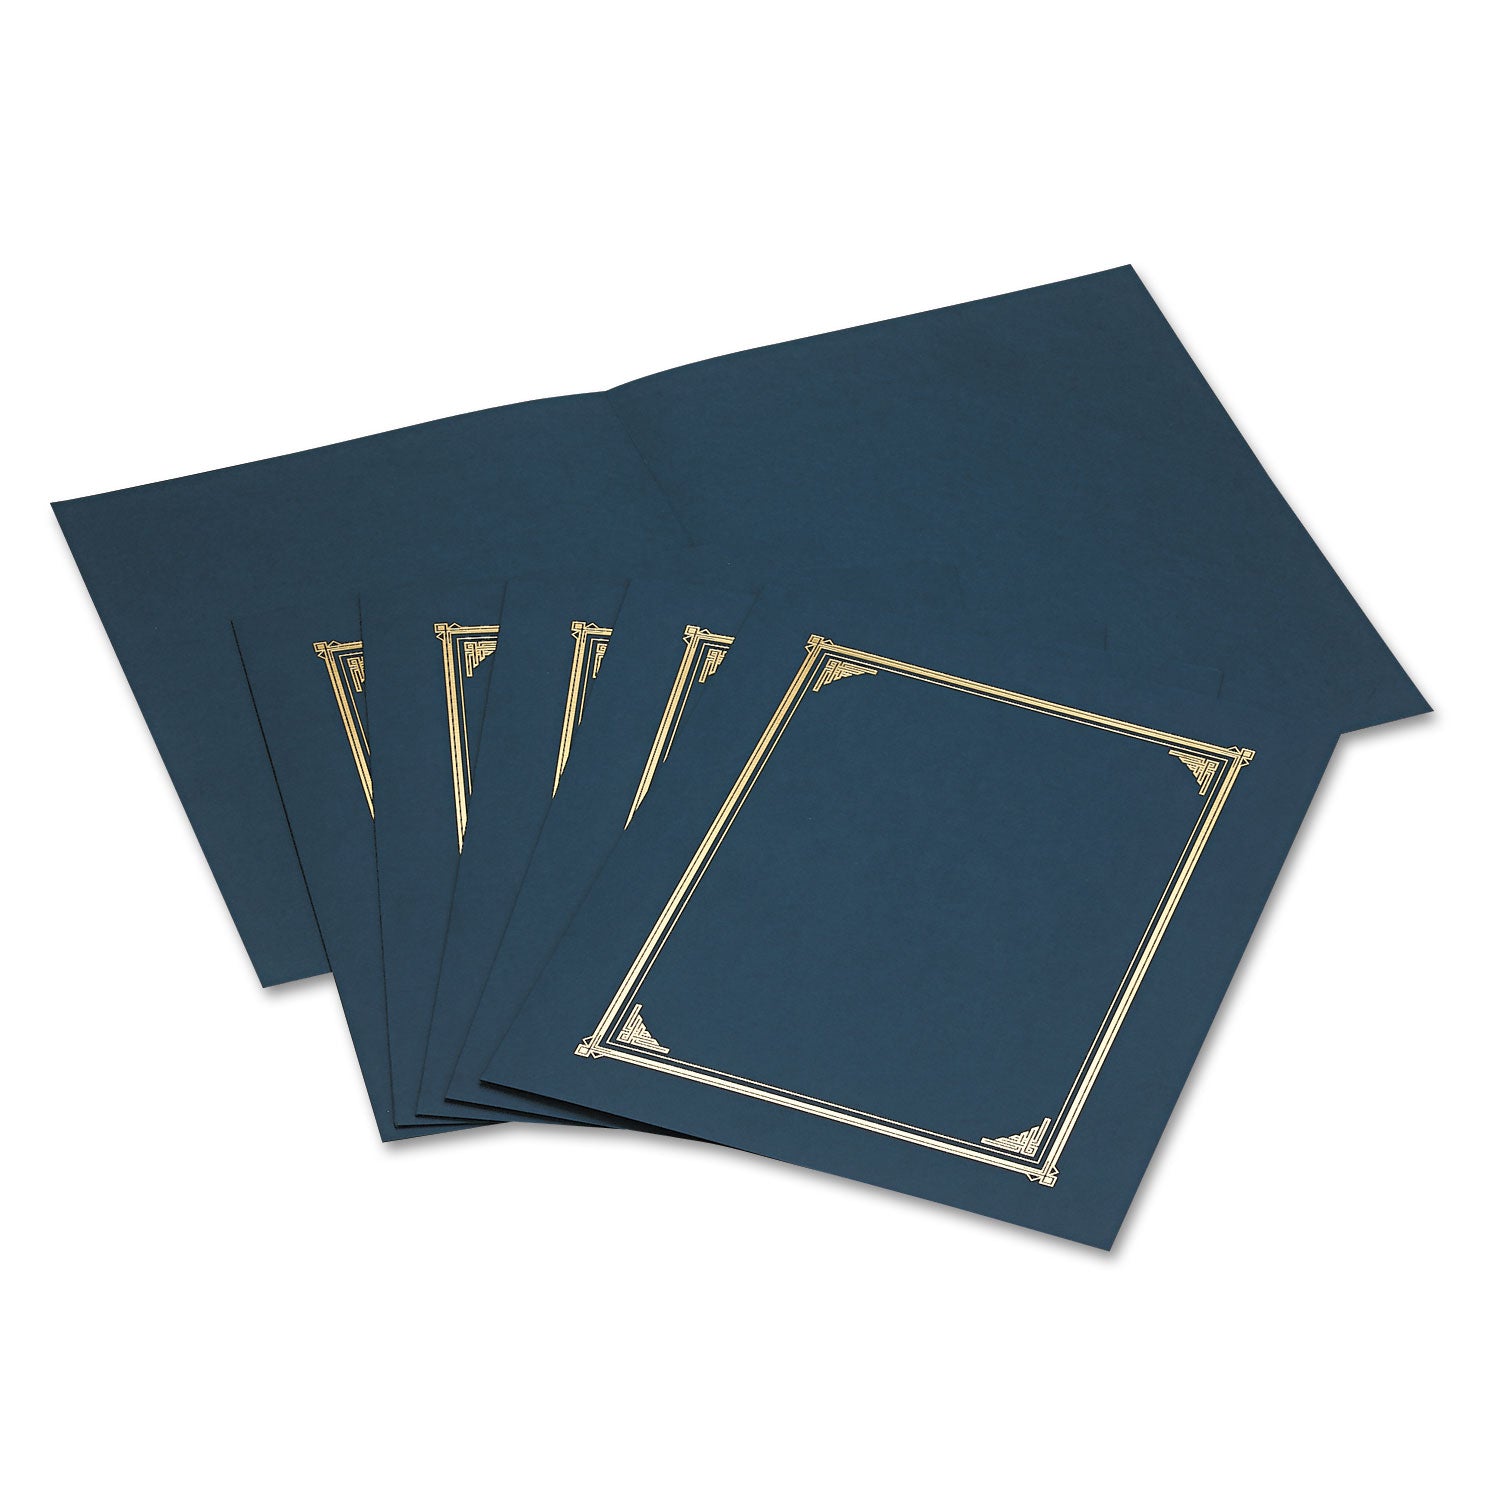 Certificate/Document Cover, 12.5 x 9.75, Navy Blue, 6/Pack - 